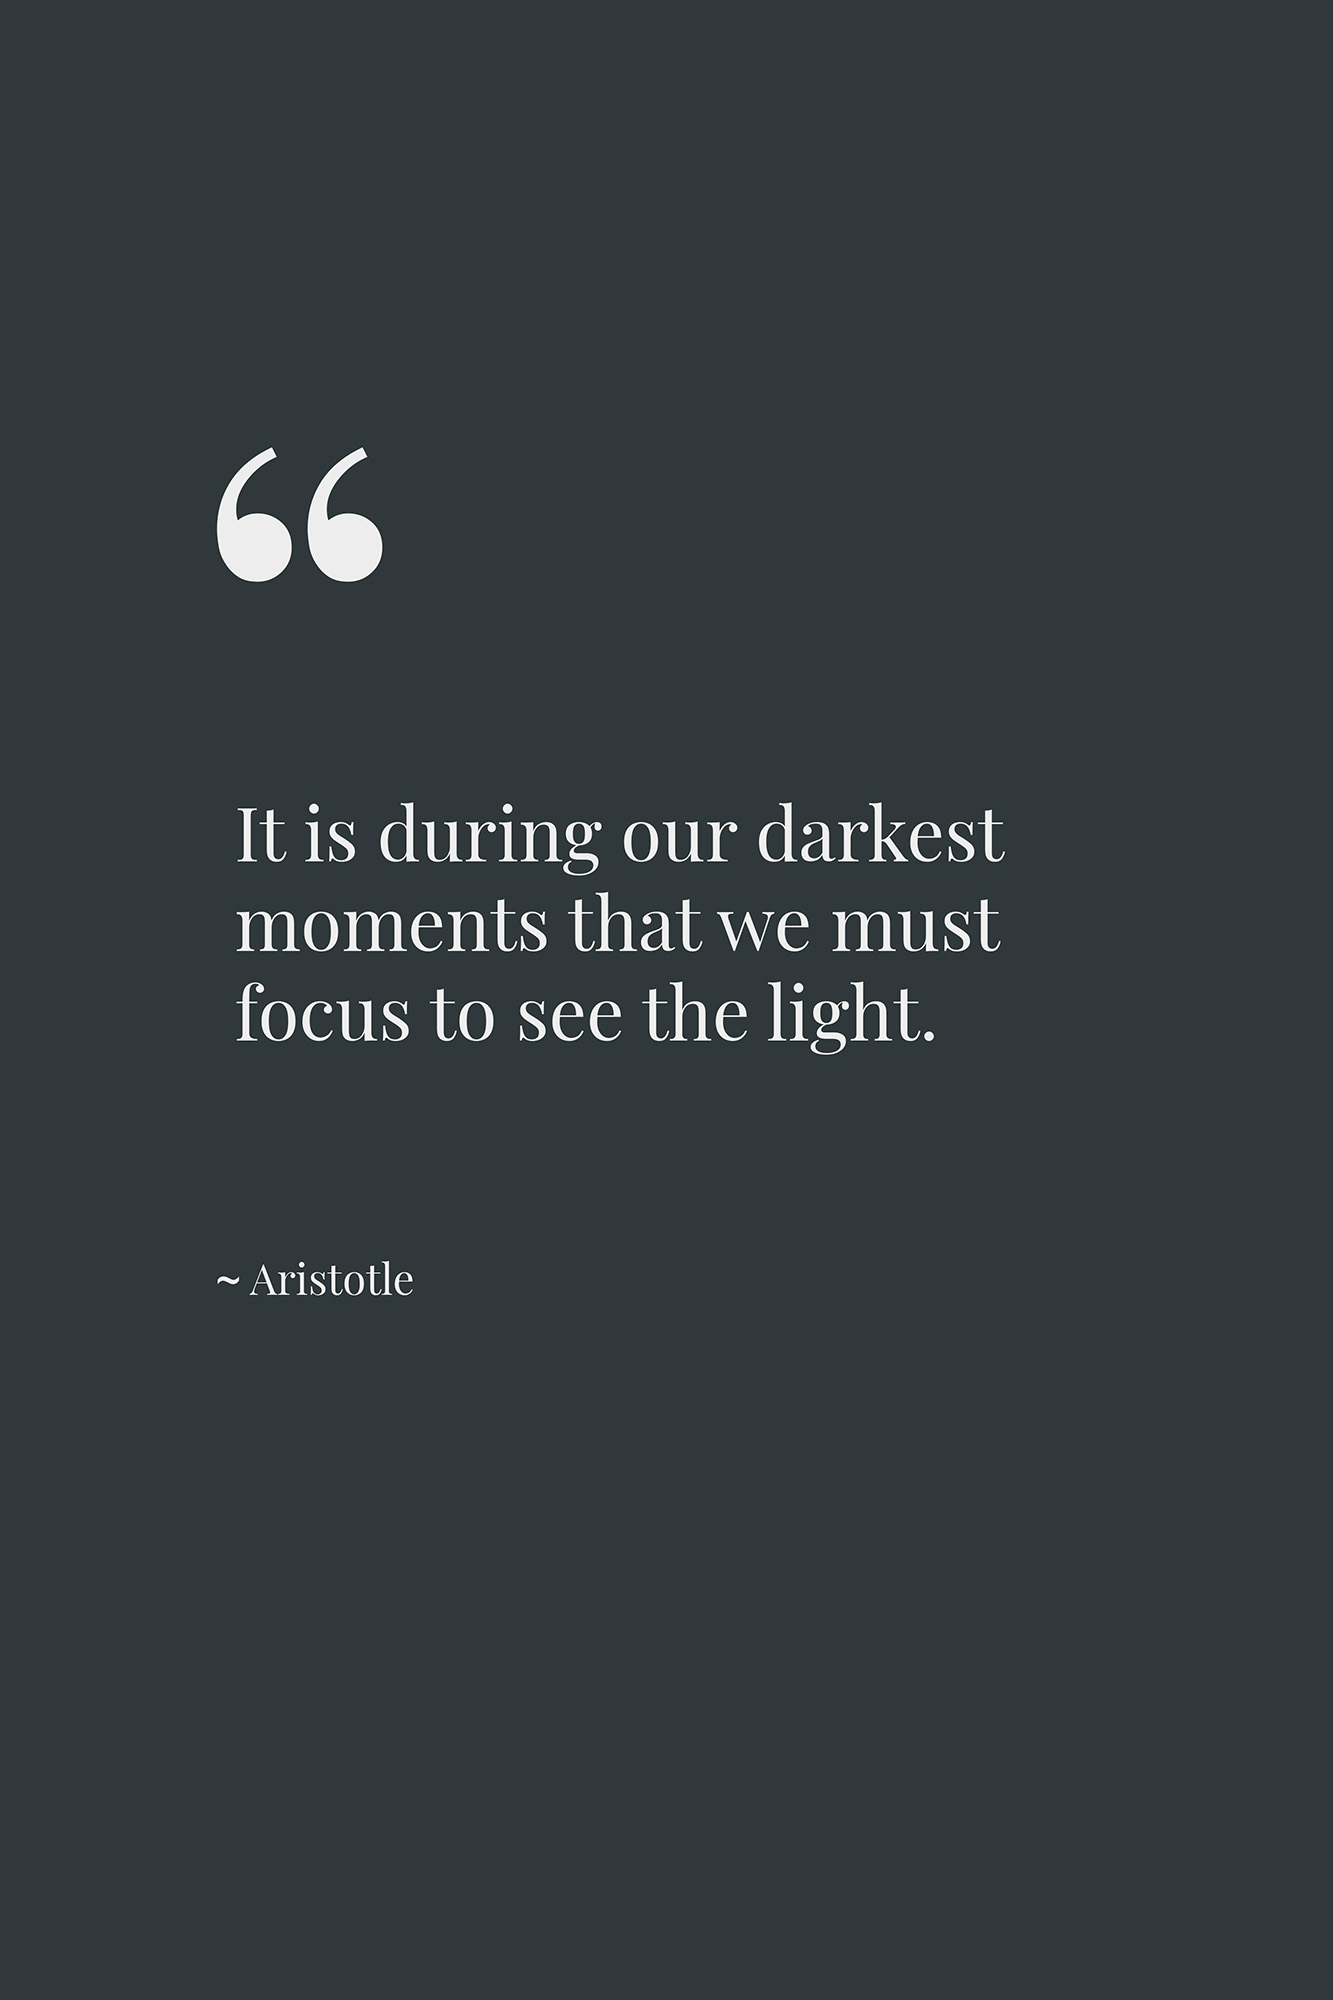 It is during our darkest moments that we must focus to see the light. ~ Aristotle